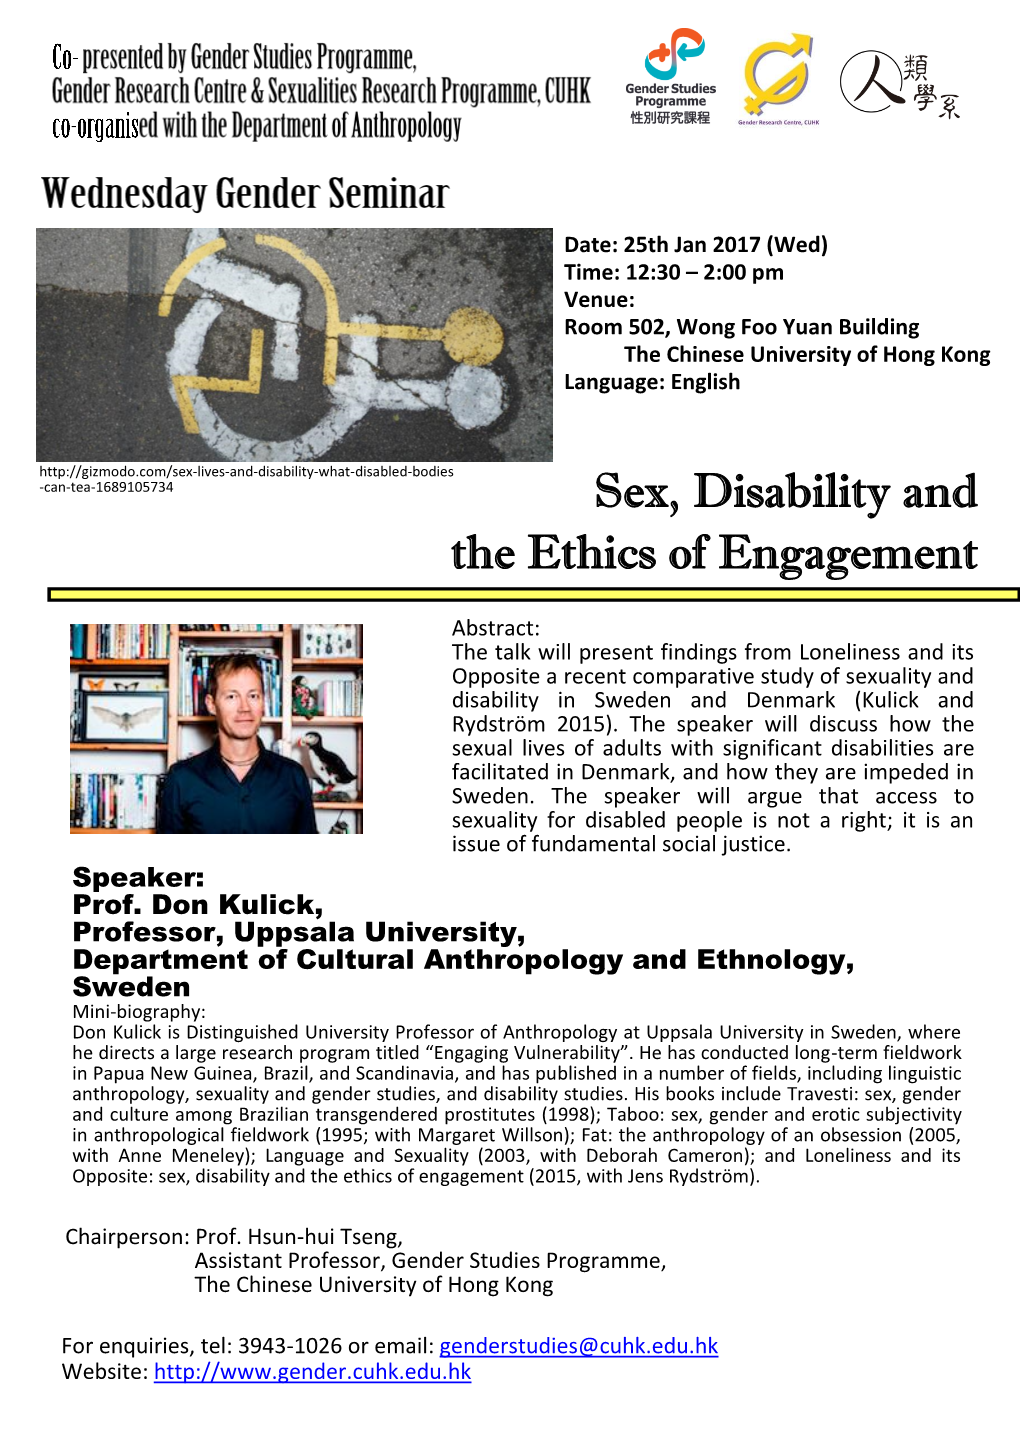 Sex, Disability and the Ethics of Engagement